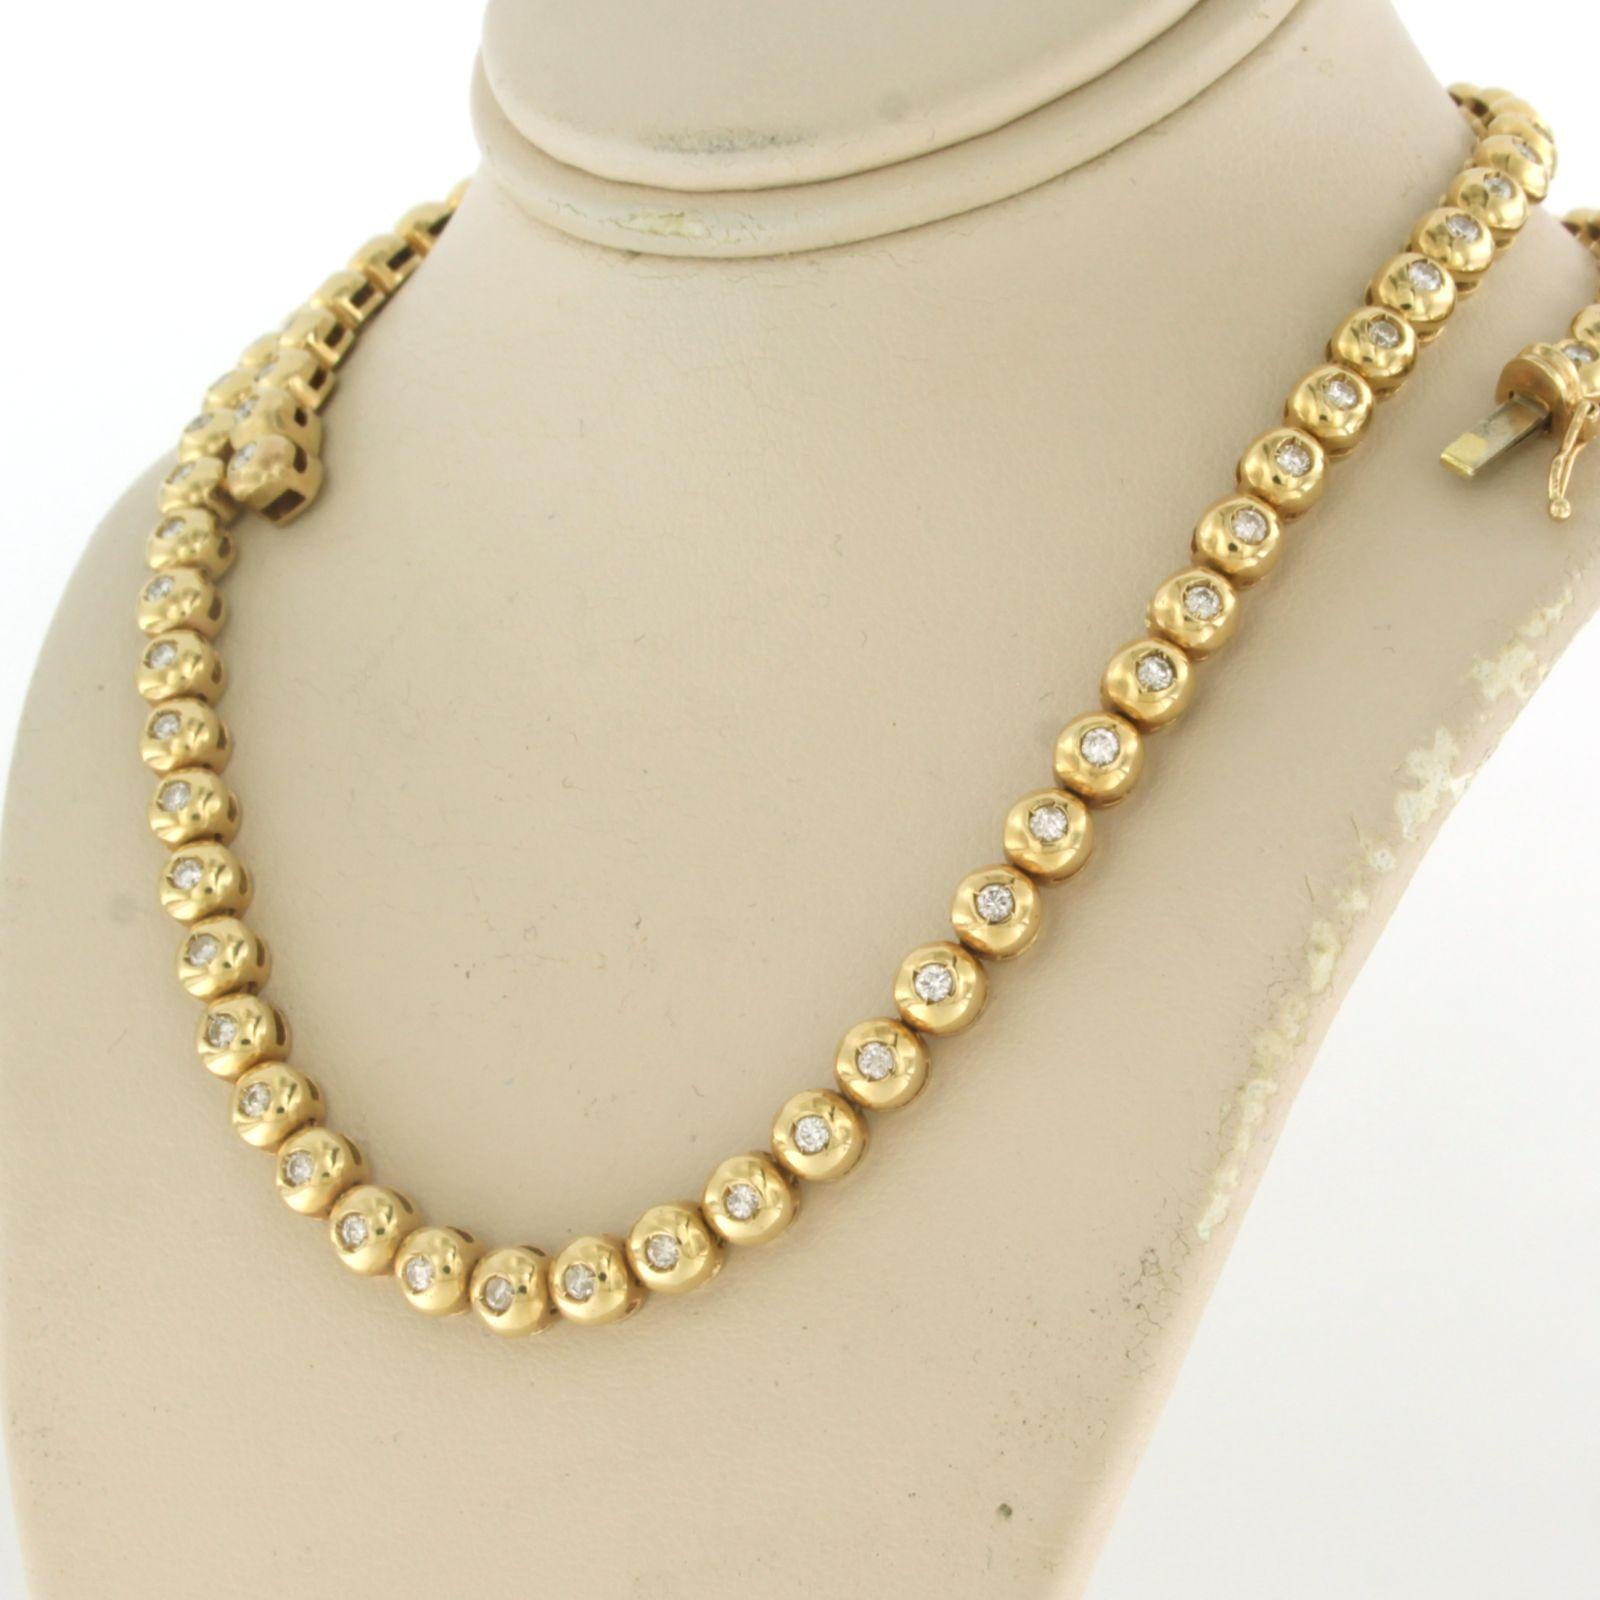 Modern Tennis necklace set with diamonds up to 3.00ct 14k yellow gold